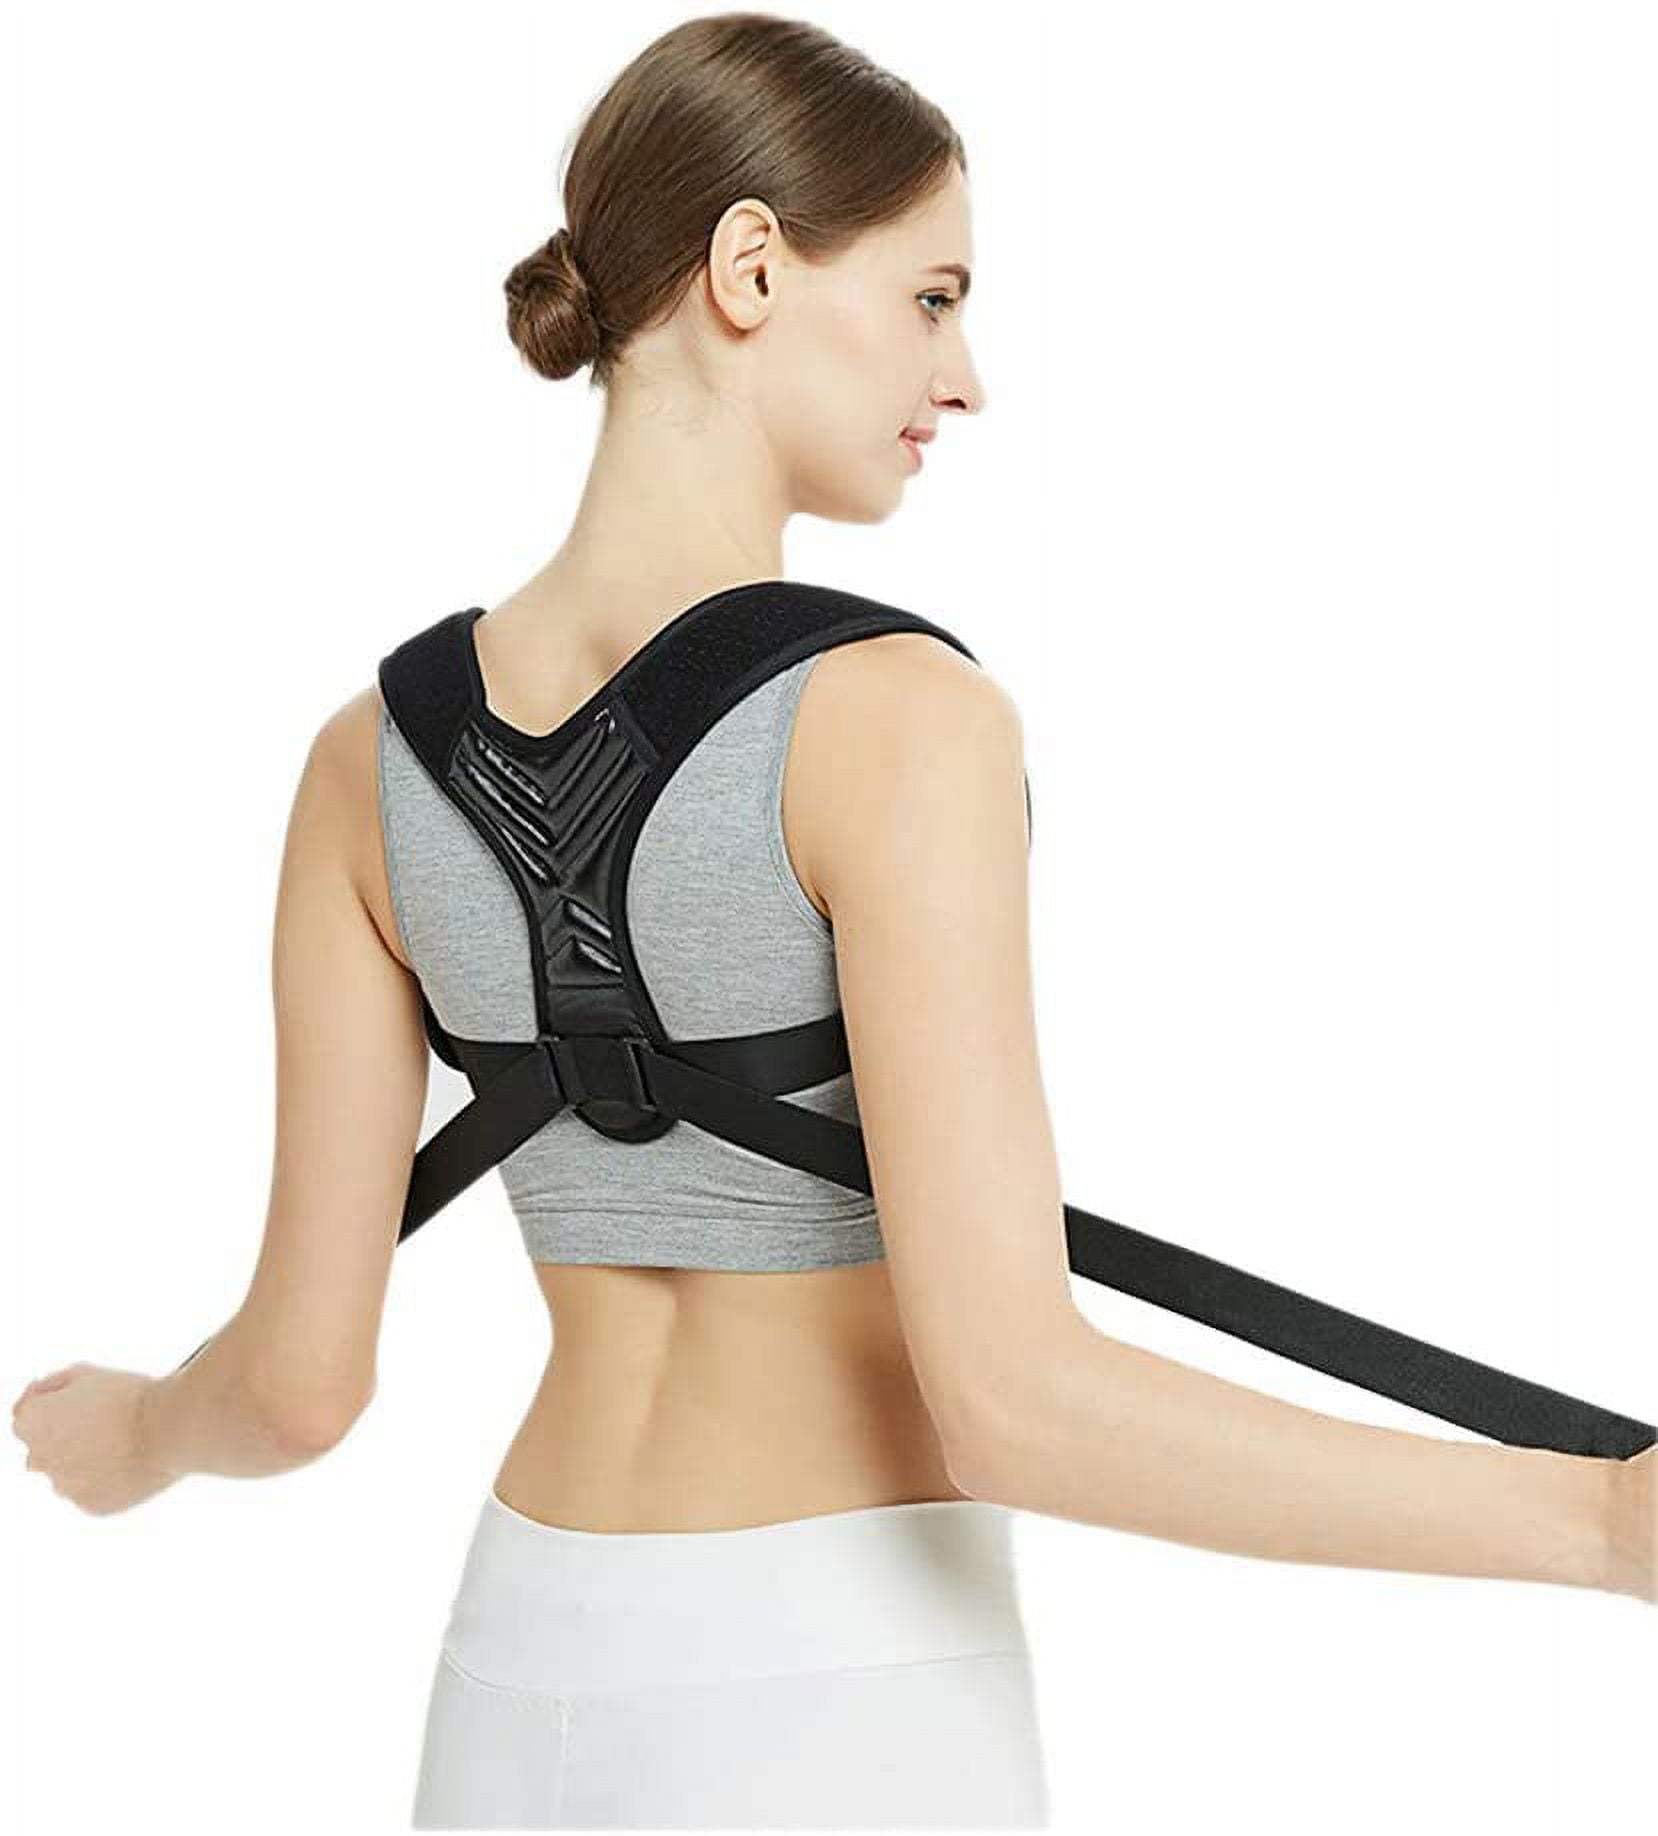 Posture Corrector for Men and Women, Upper Back Brace for Clavicle Support,Adjustable  Back Straightener and Providing Pain Relief from Neck, Back and Shoulder 